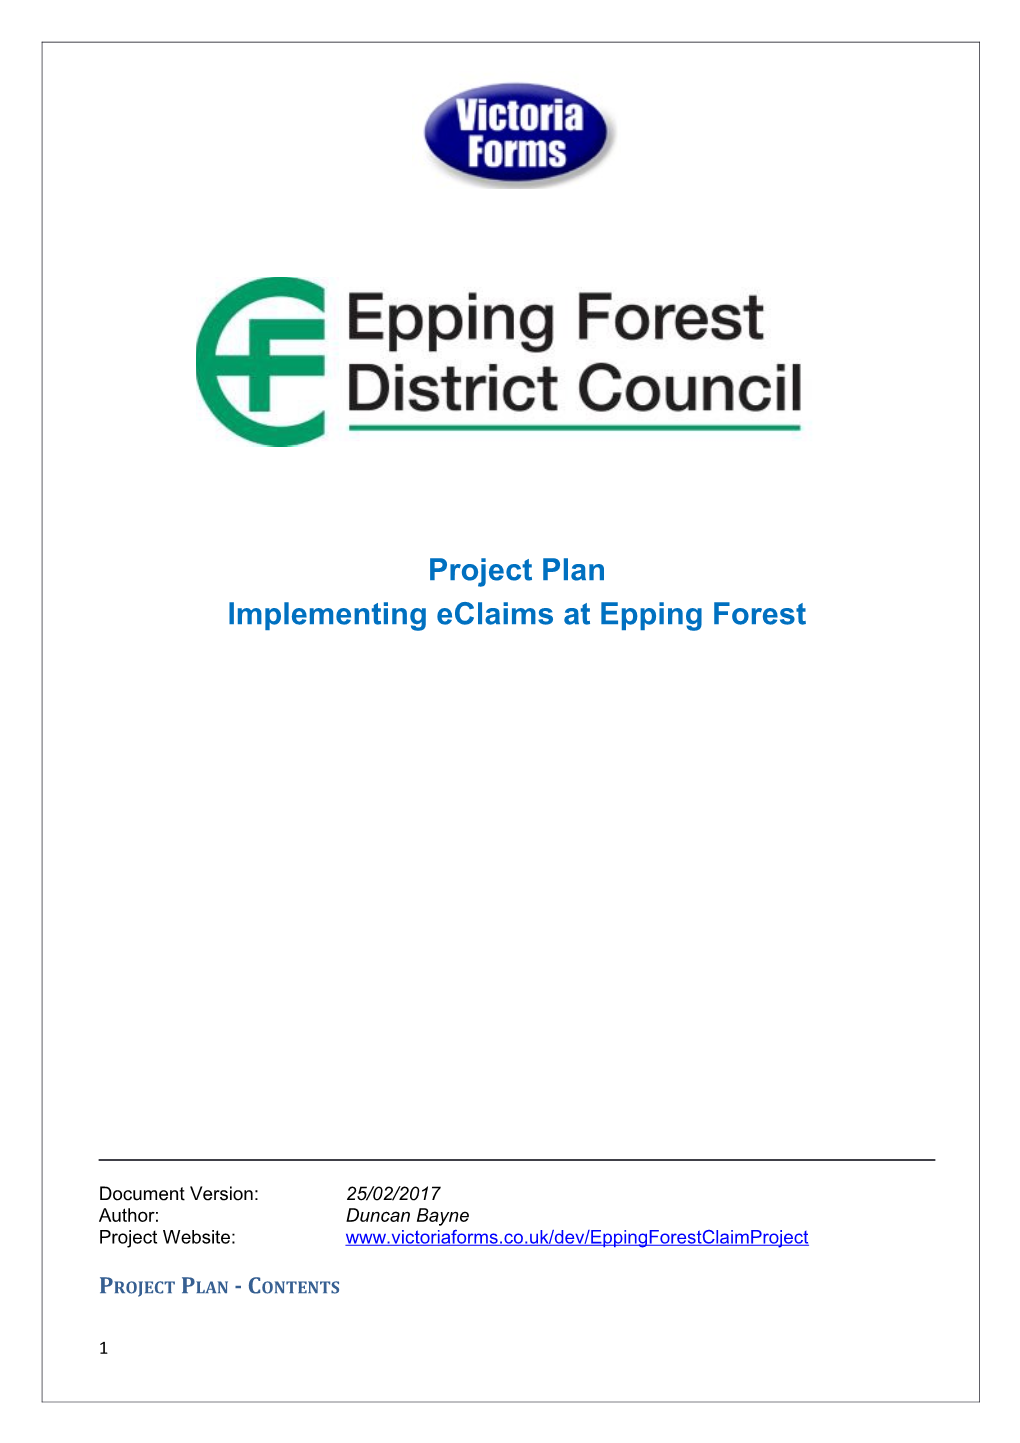 Implementing Eclaims at Epping Forest